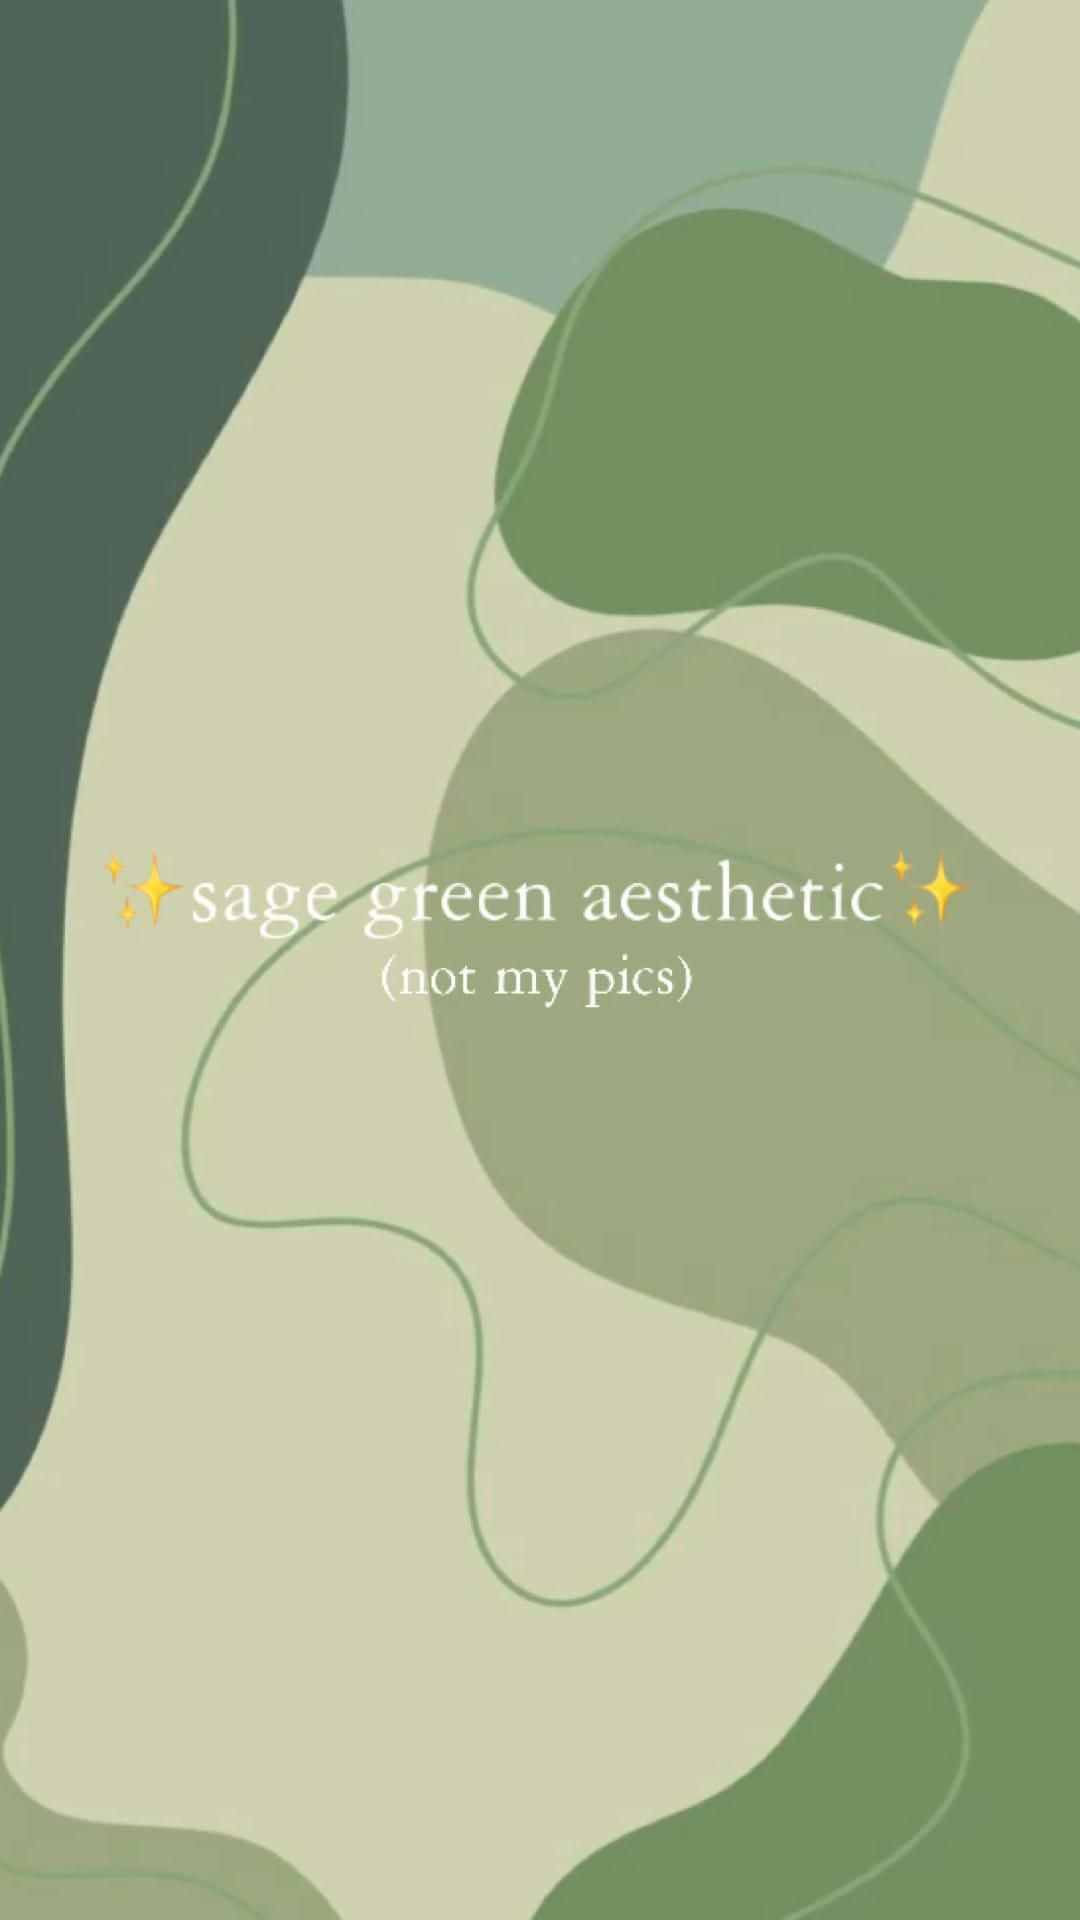 Sage green aesthetic phone background with text that says 